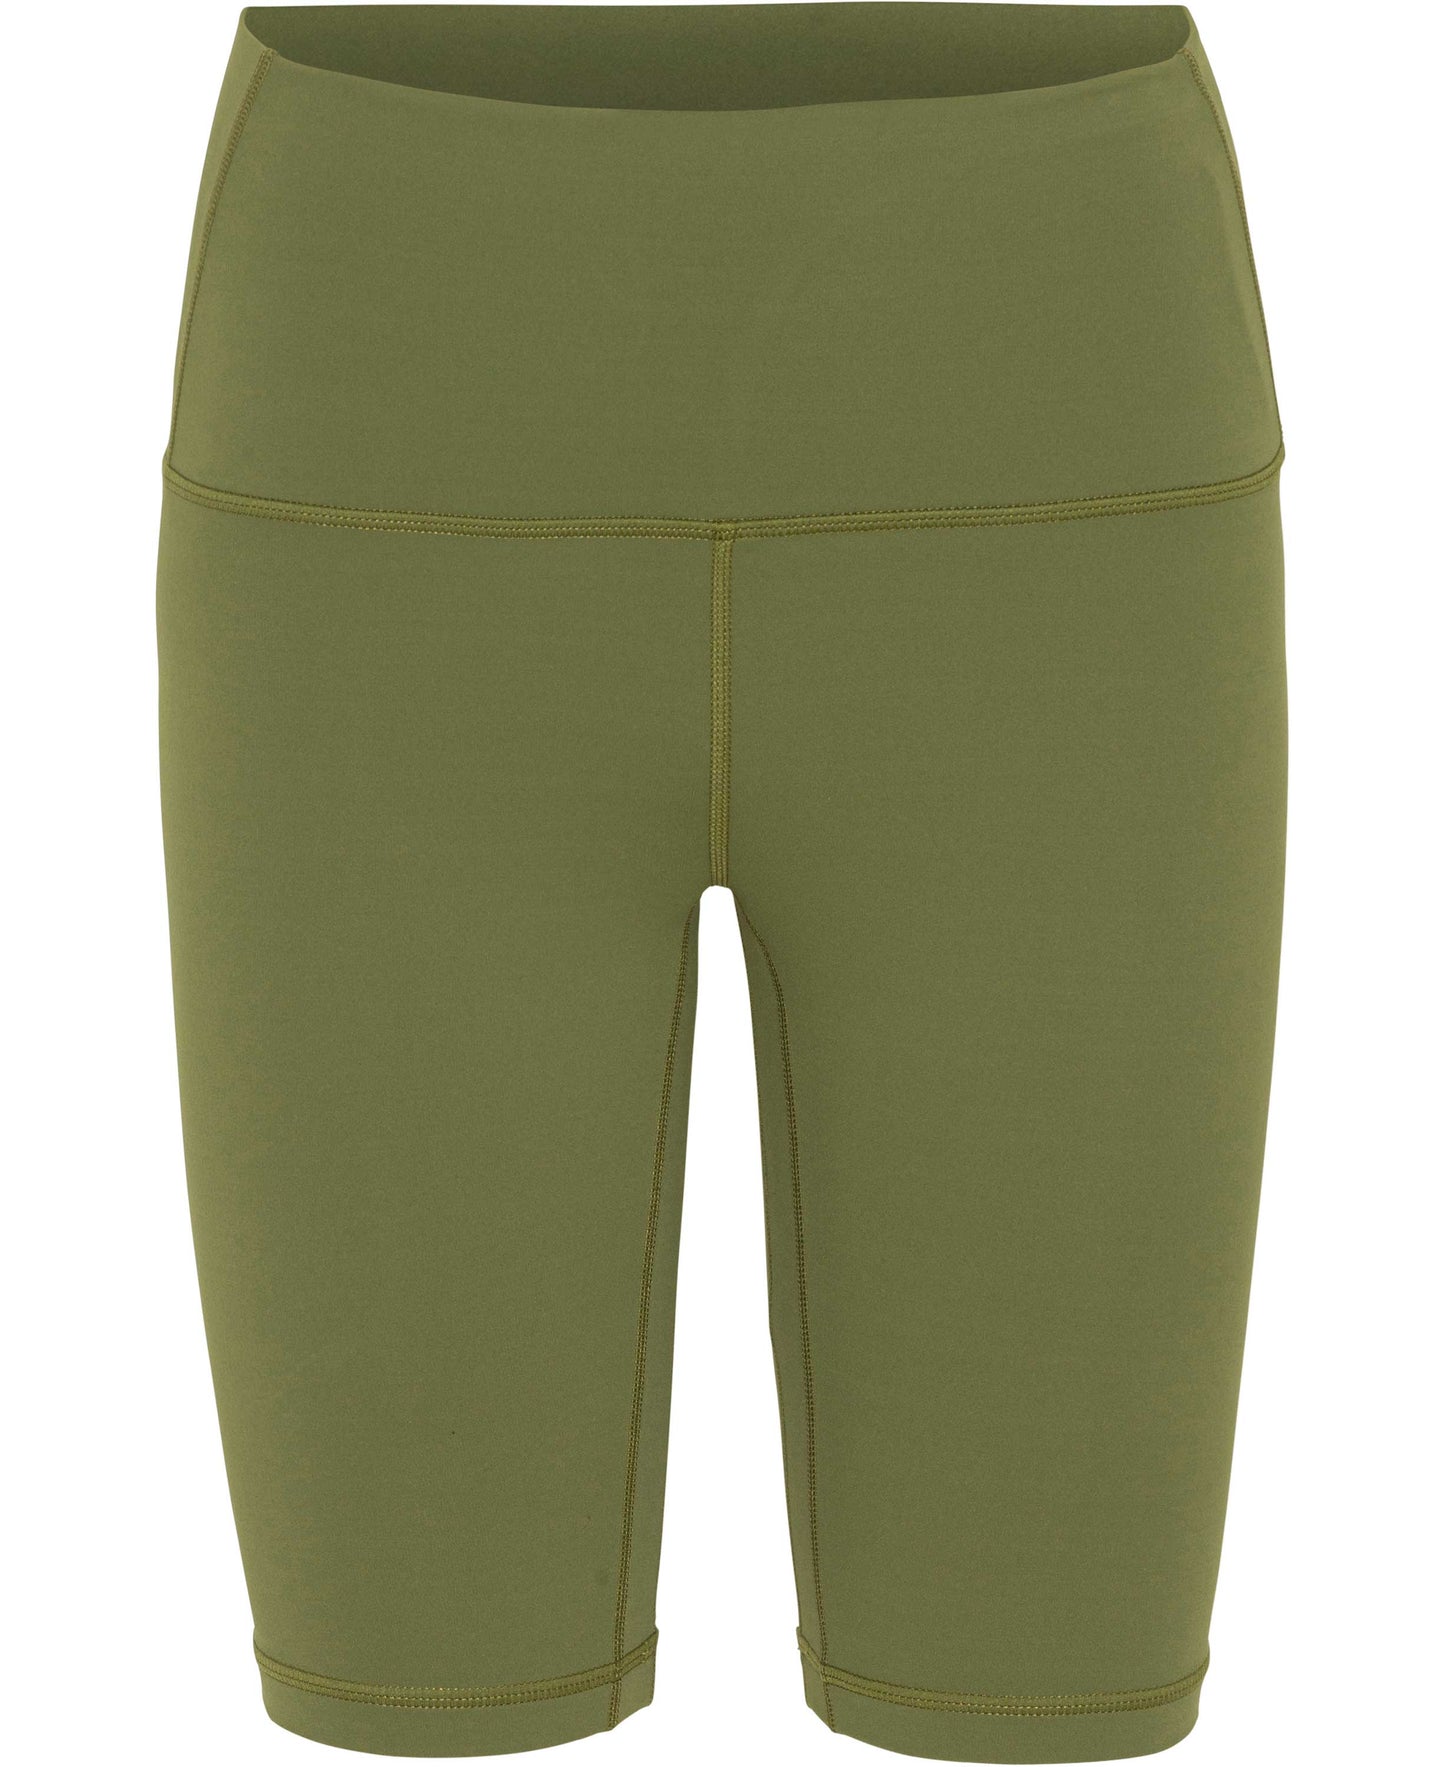 Lunar Luxe Shorts 8 - Olive Green